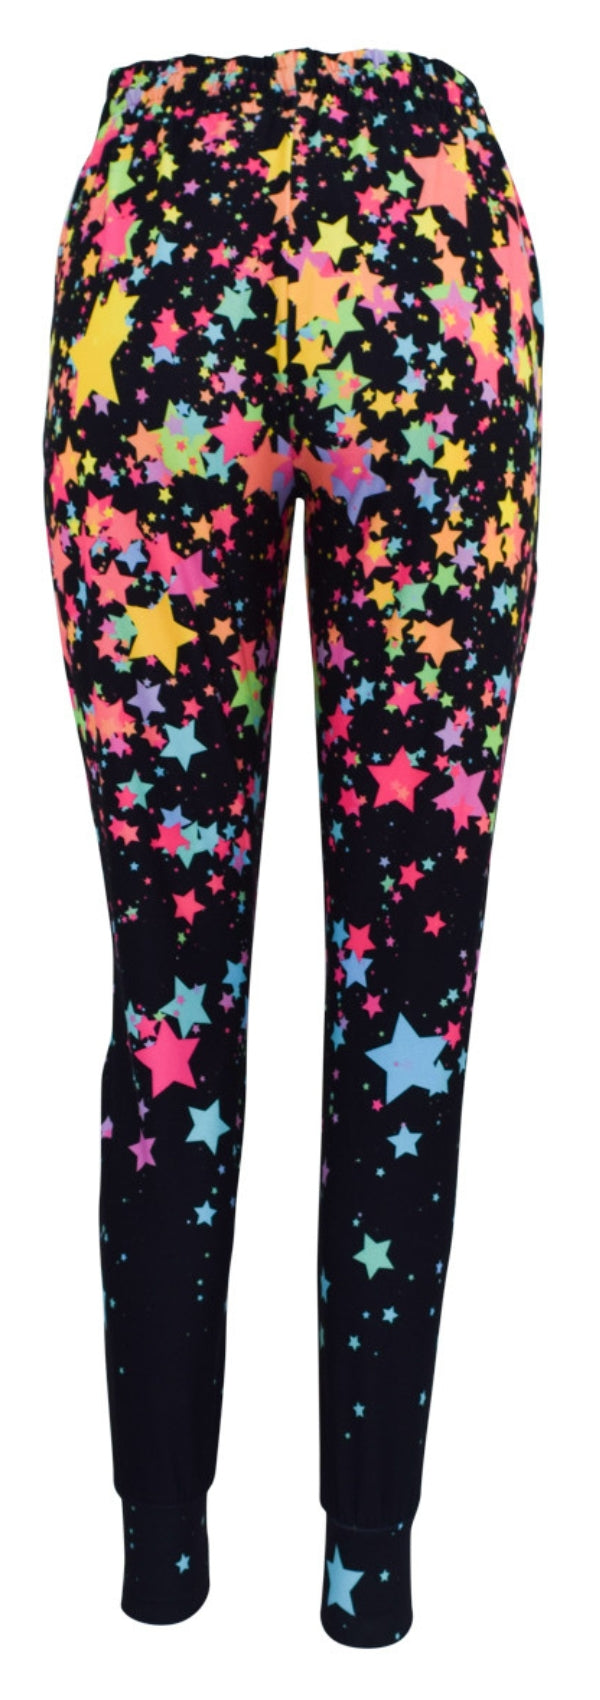 Starbright Lejoggers-Joggers